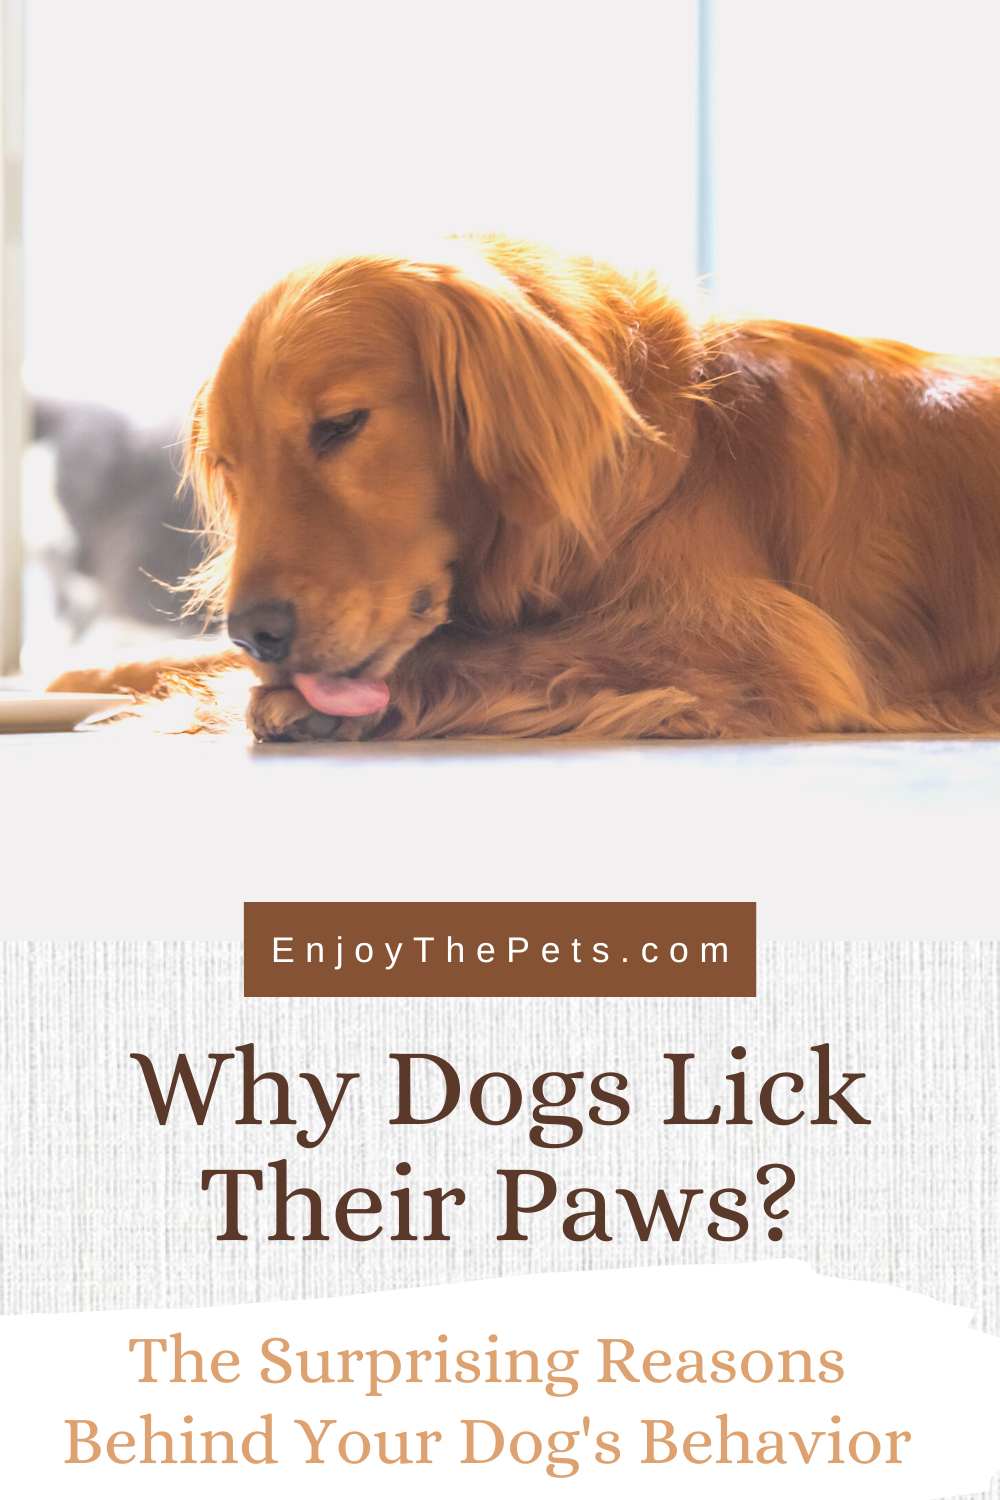 Why Dogs Lick Their Paws The Surprising Reasons Behind Your Dog's Behavior